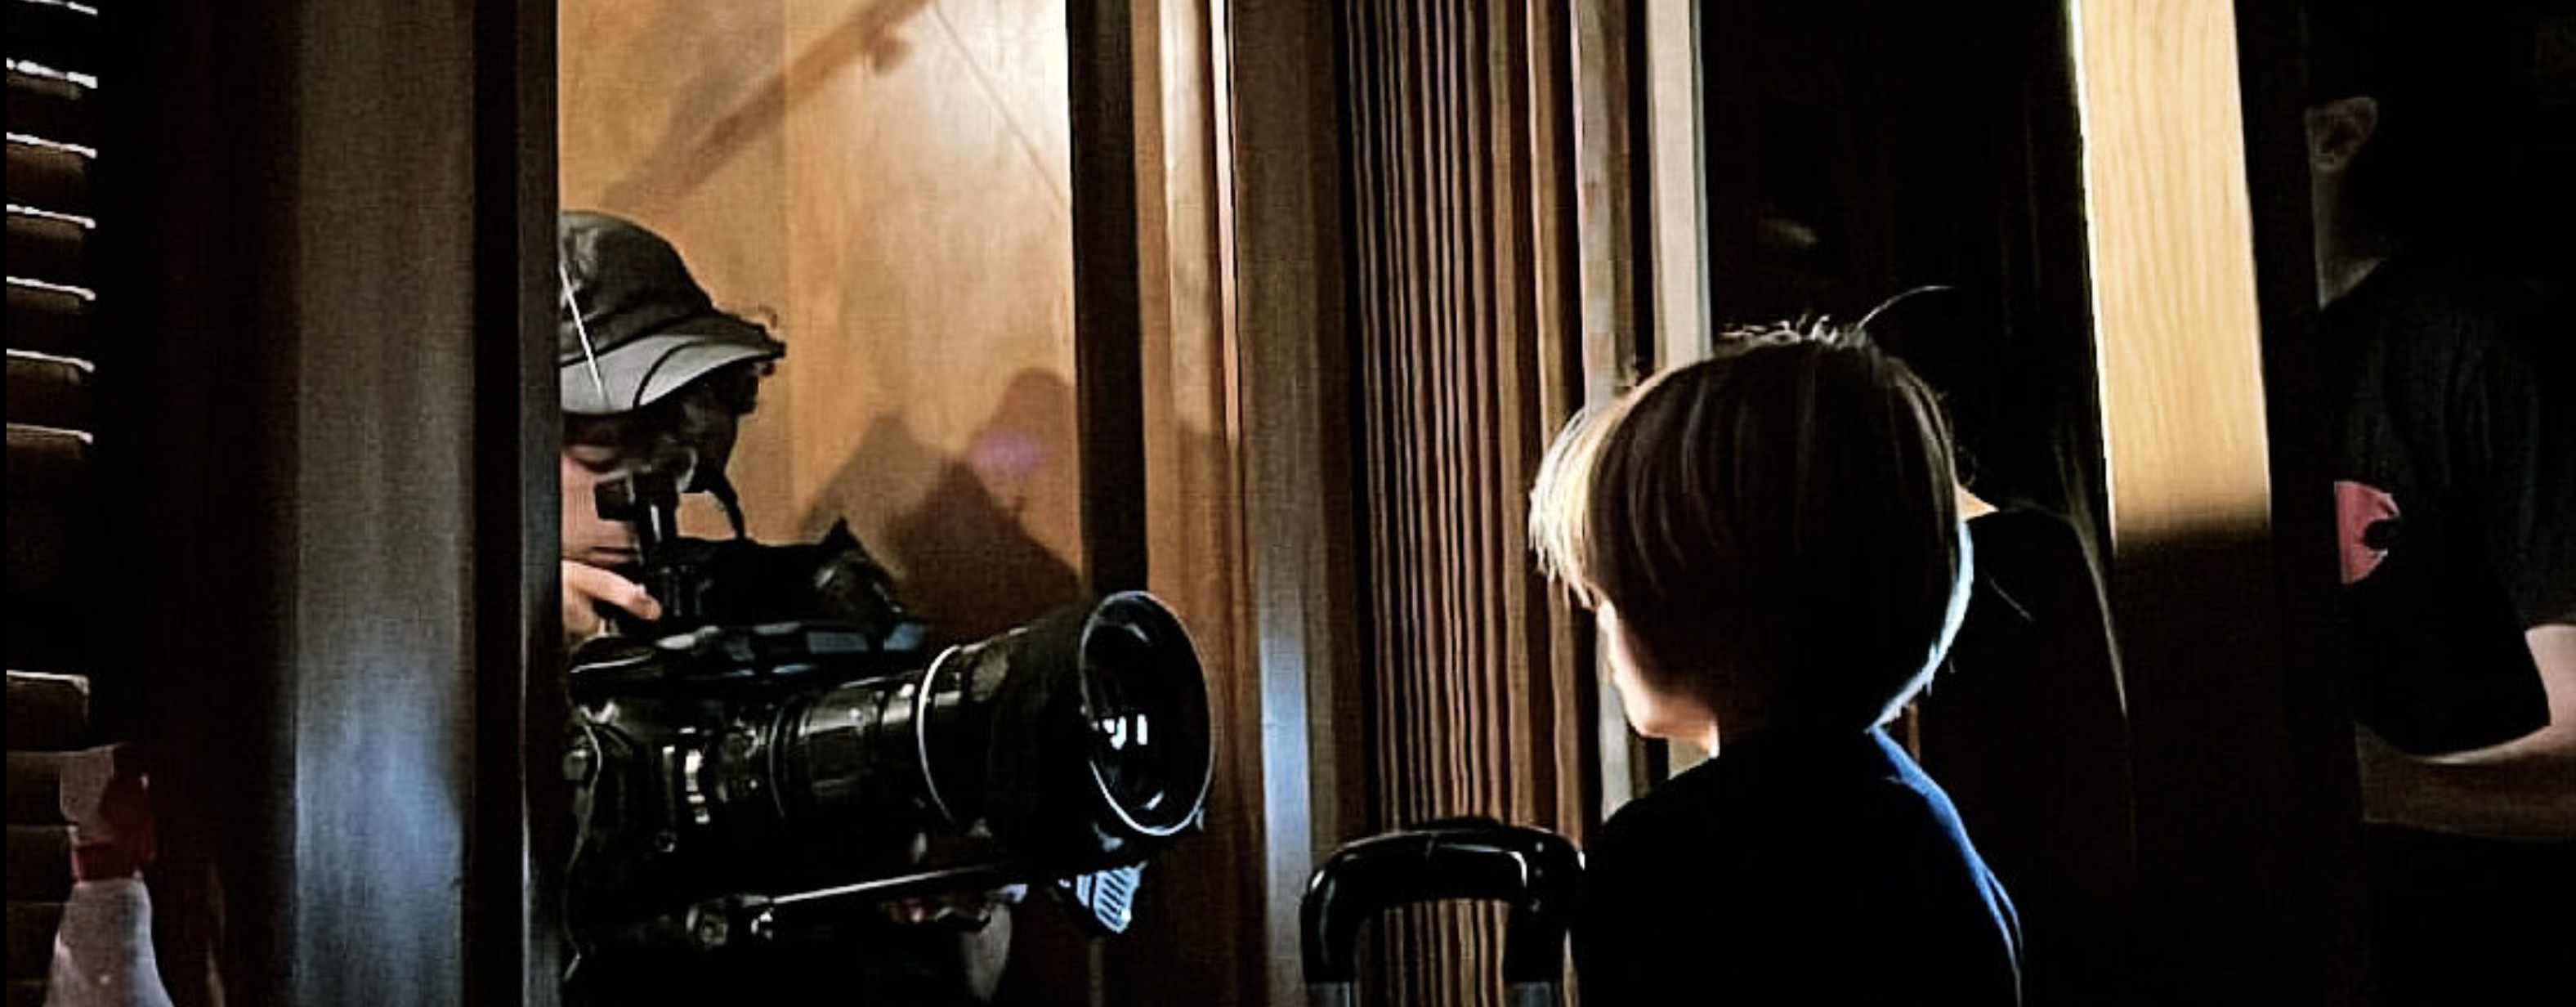 a child actor standing in a dark room, a cinematographer holding a camera in front of the child actor